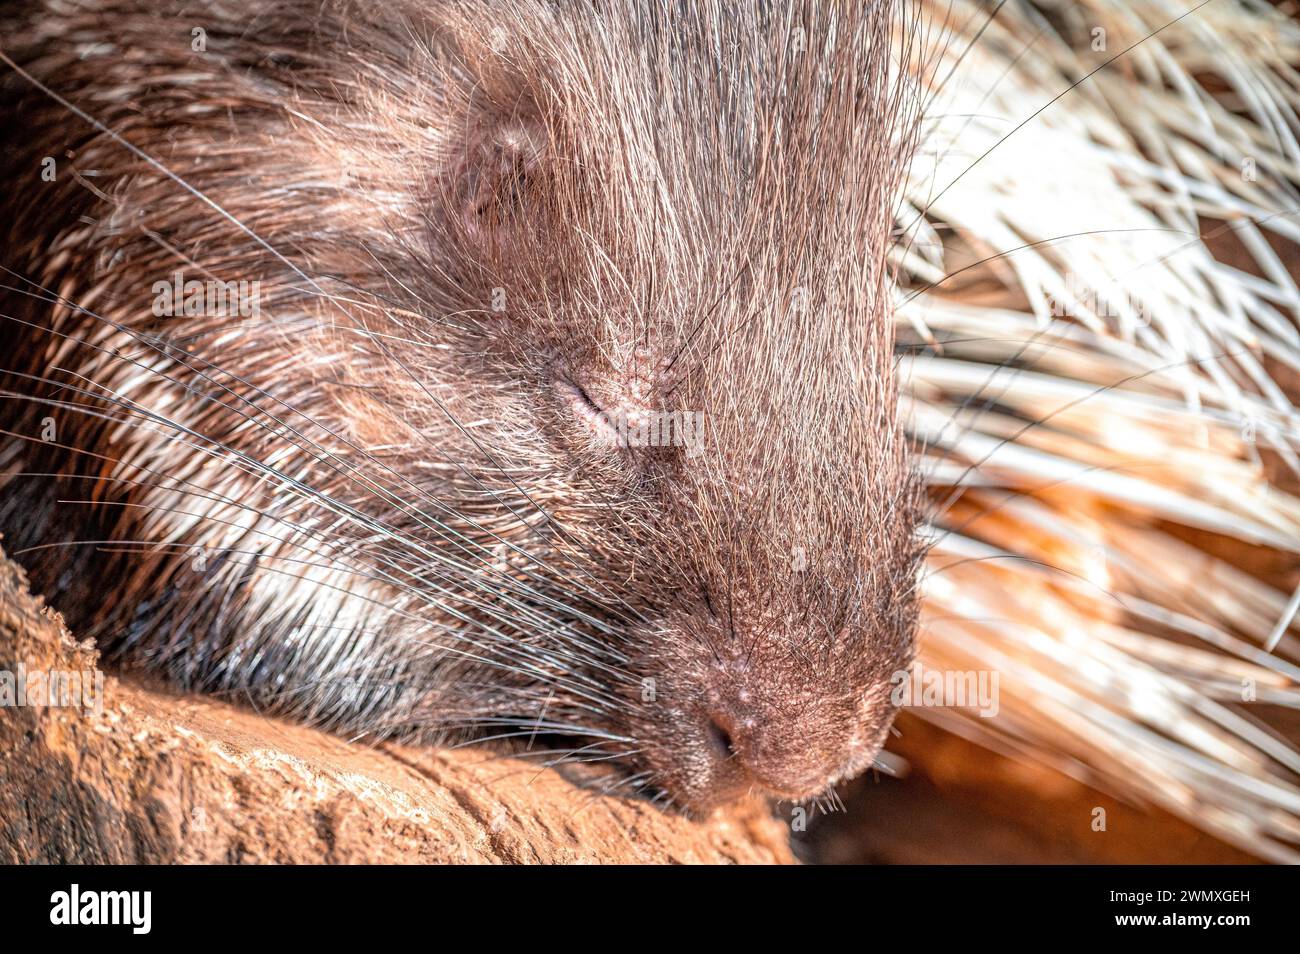 Face of a sleeping old world porcupine (Hystricidae), Eisenberg, Thuringia, Germany Stock Photo